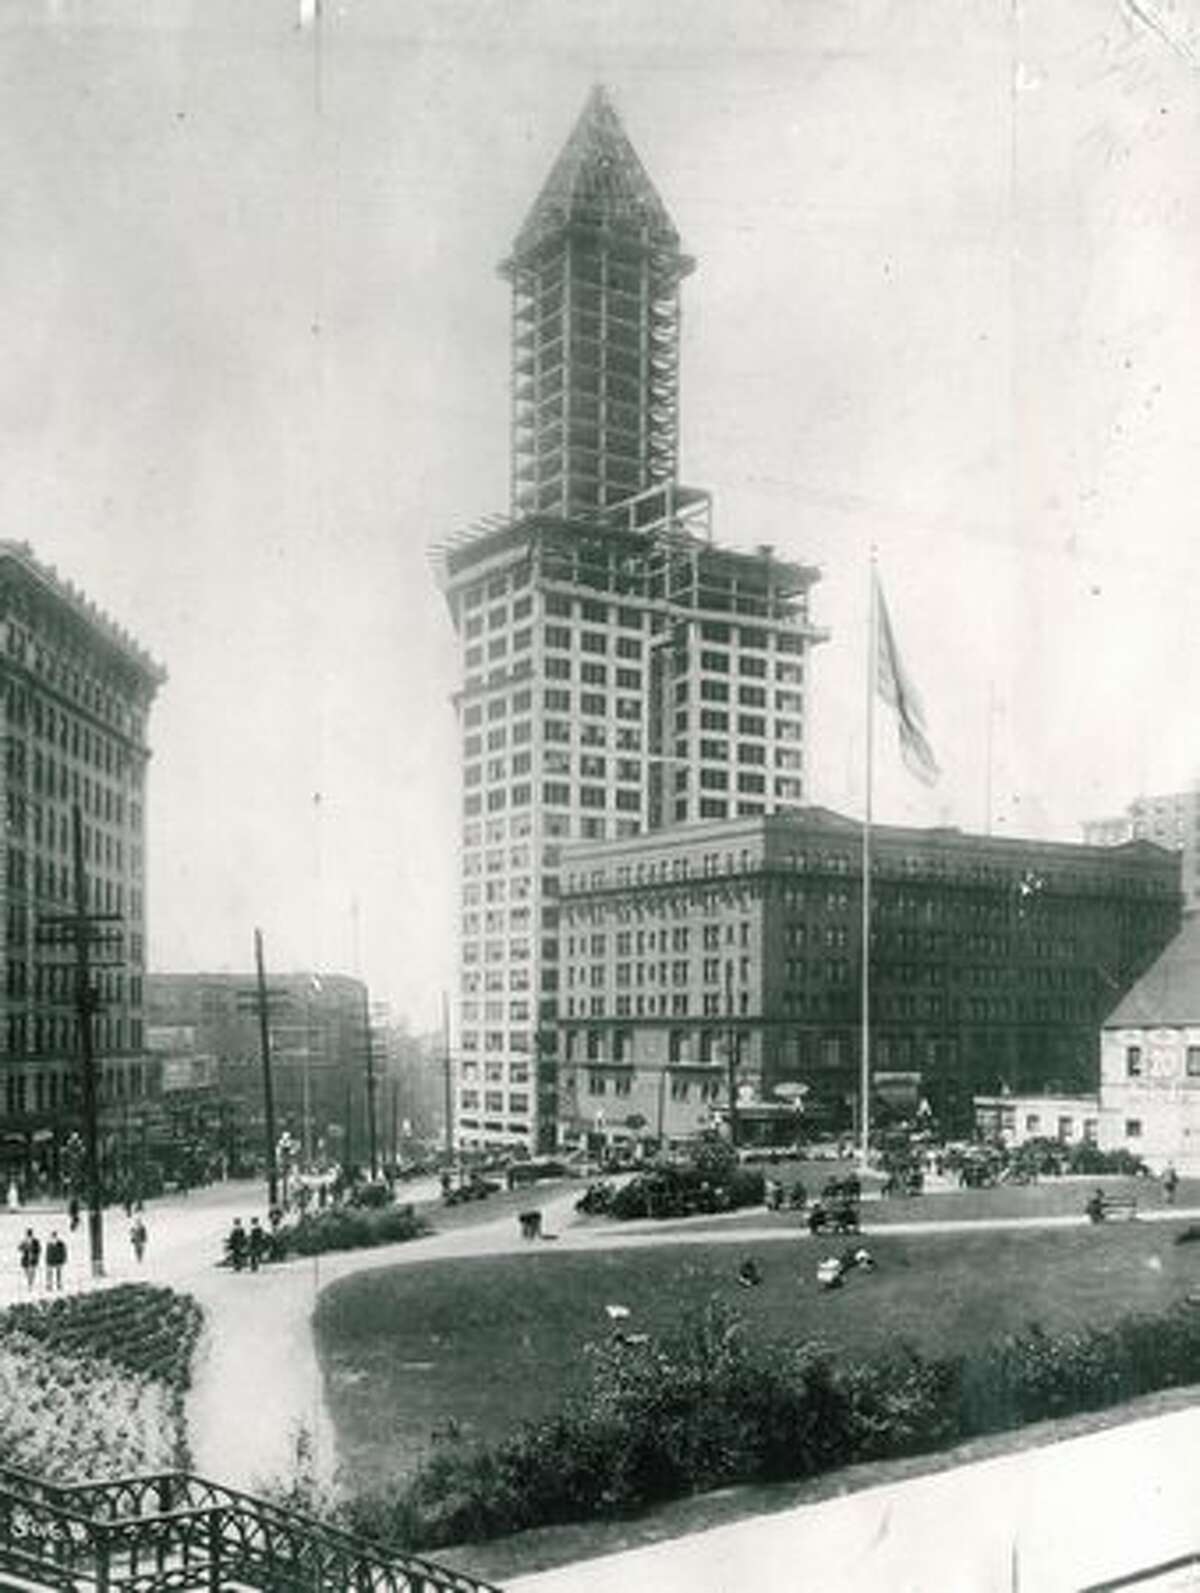 Seattle's skyline was definitely looking up as the 42-story Smith Tower was nearing completion. In 1914, it was the tallest west of the Mississippi River.